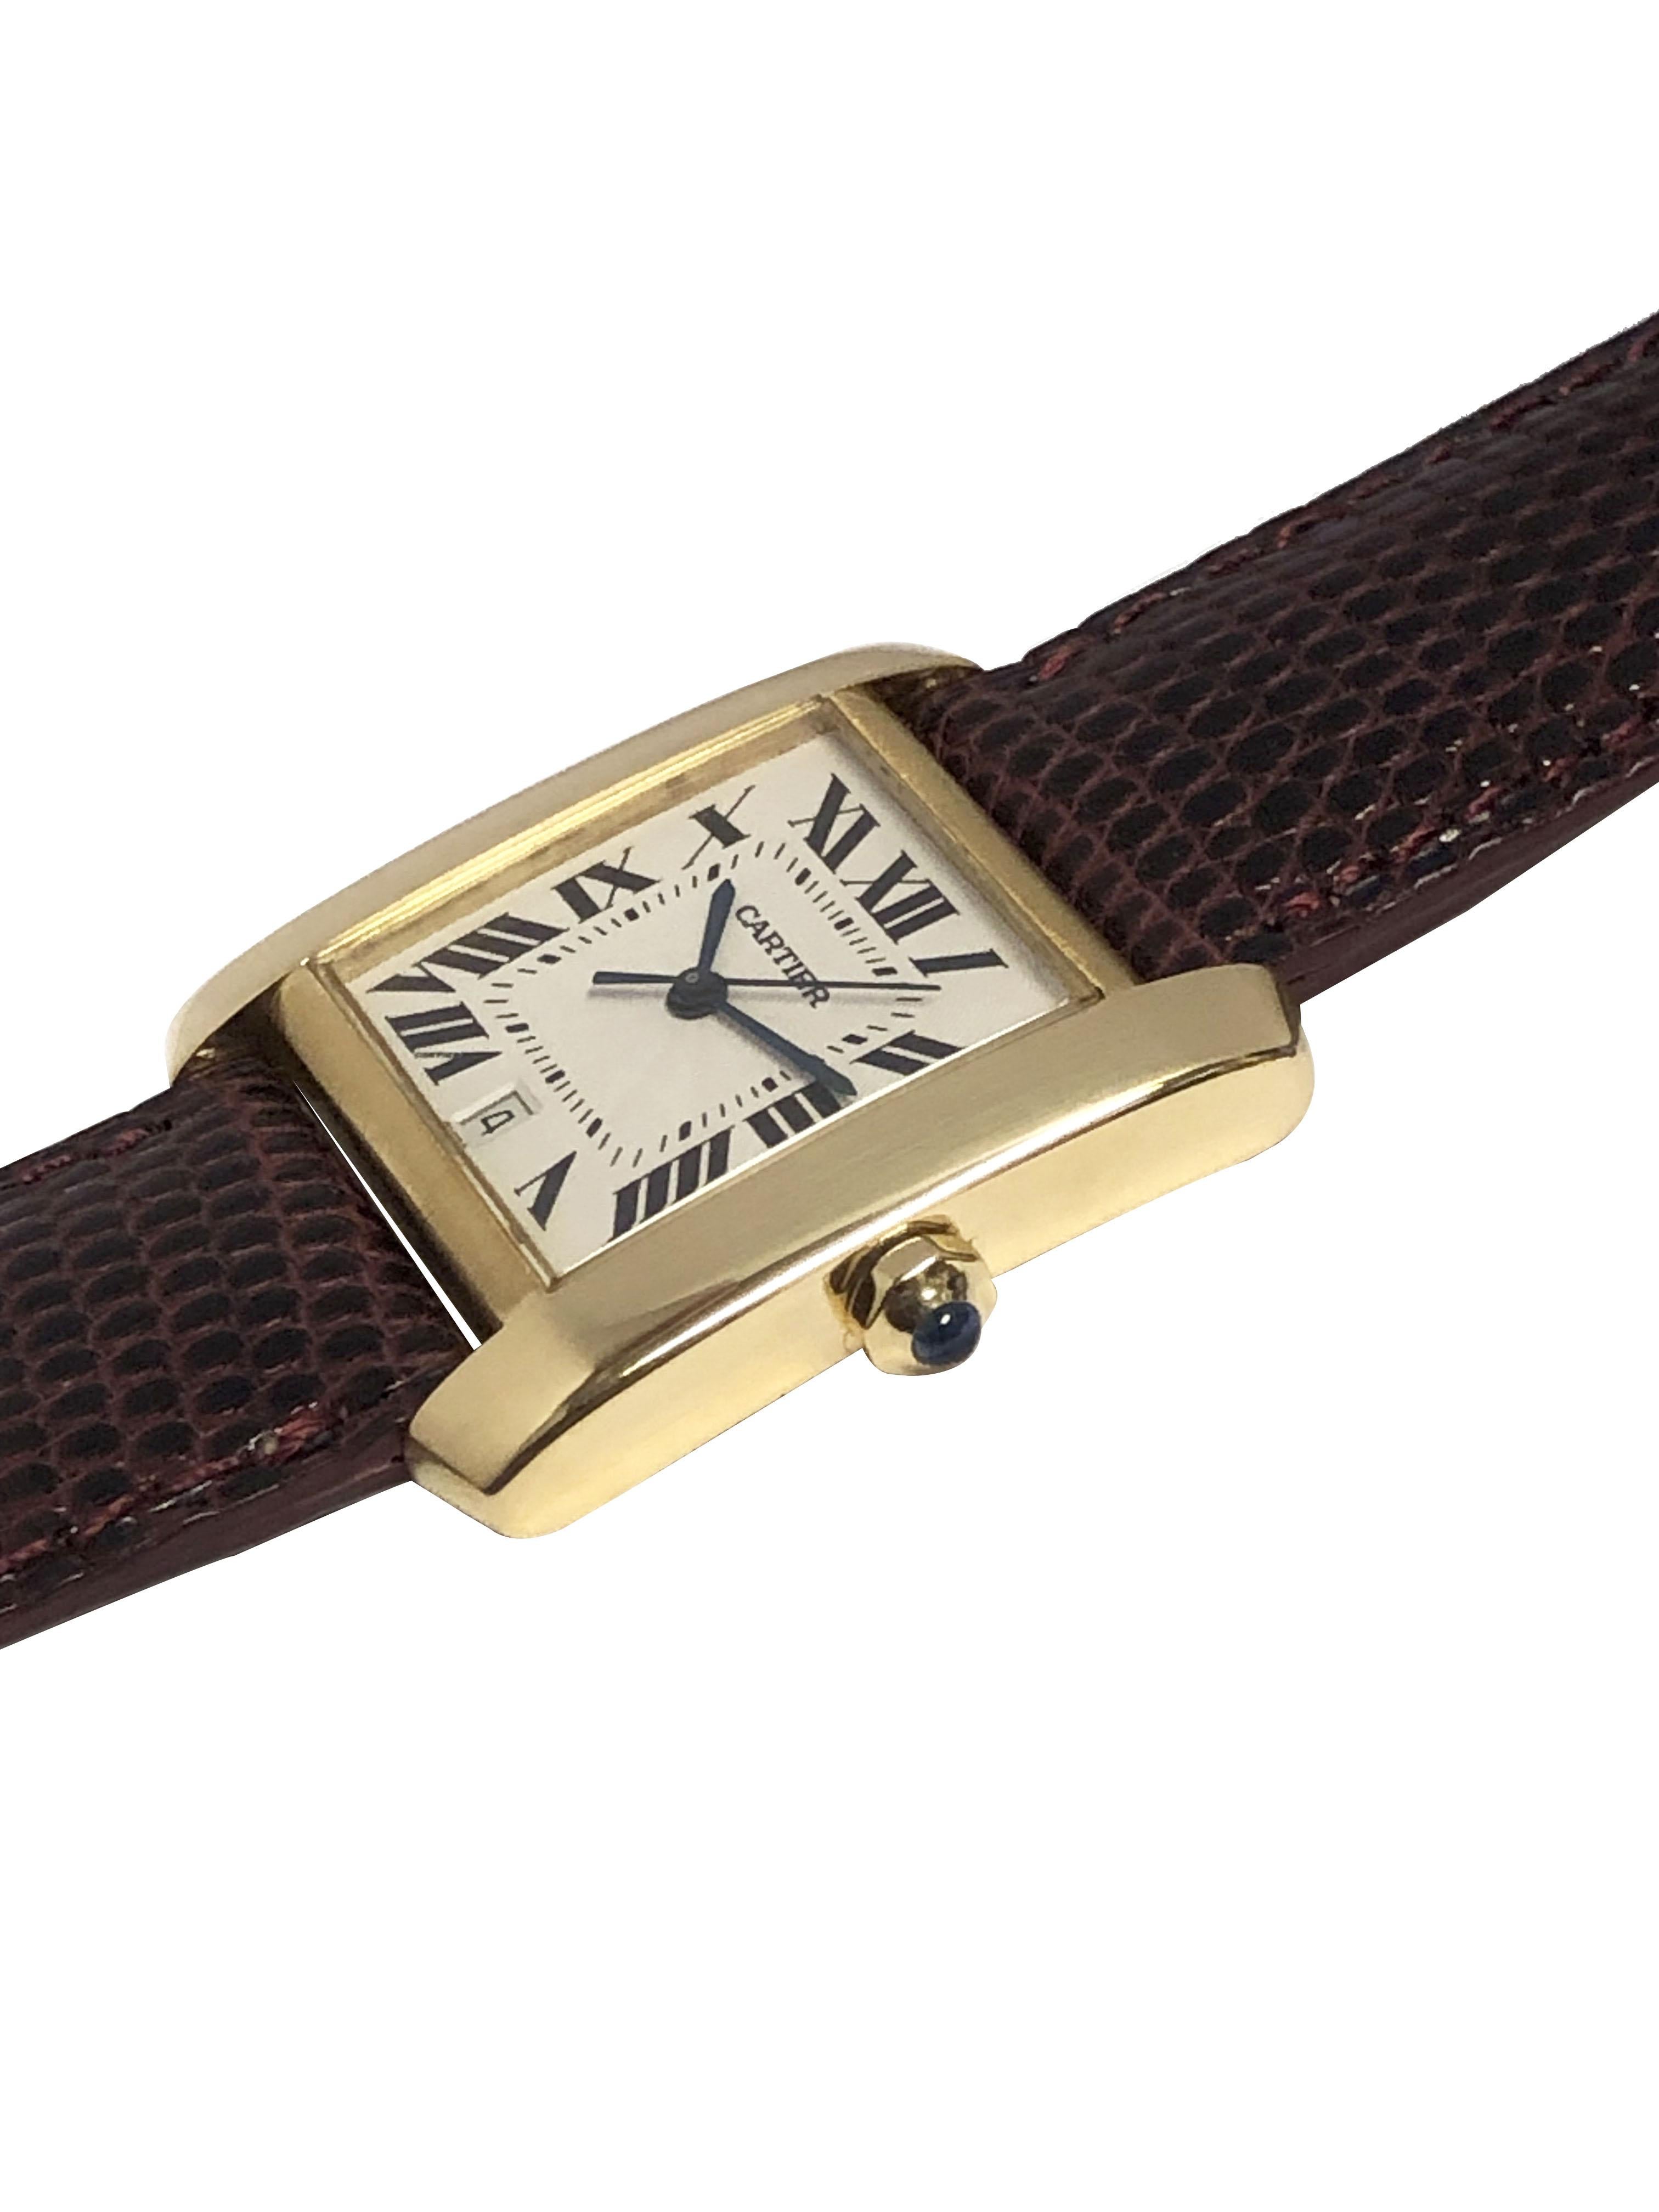 Circa 2005 Cartier Tank Francaise Reference 1840 Wrist Watch, 28 X 23 M.M. 18k Yellow Gold 2 piece Water resistant case, Automatic Self winding movement, Sapphire Crown and Sapphire Glass Crystal. Engine Turned White dial with Black Roman Numerals,